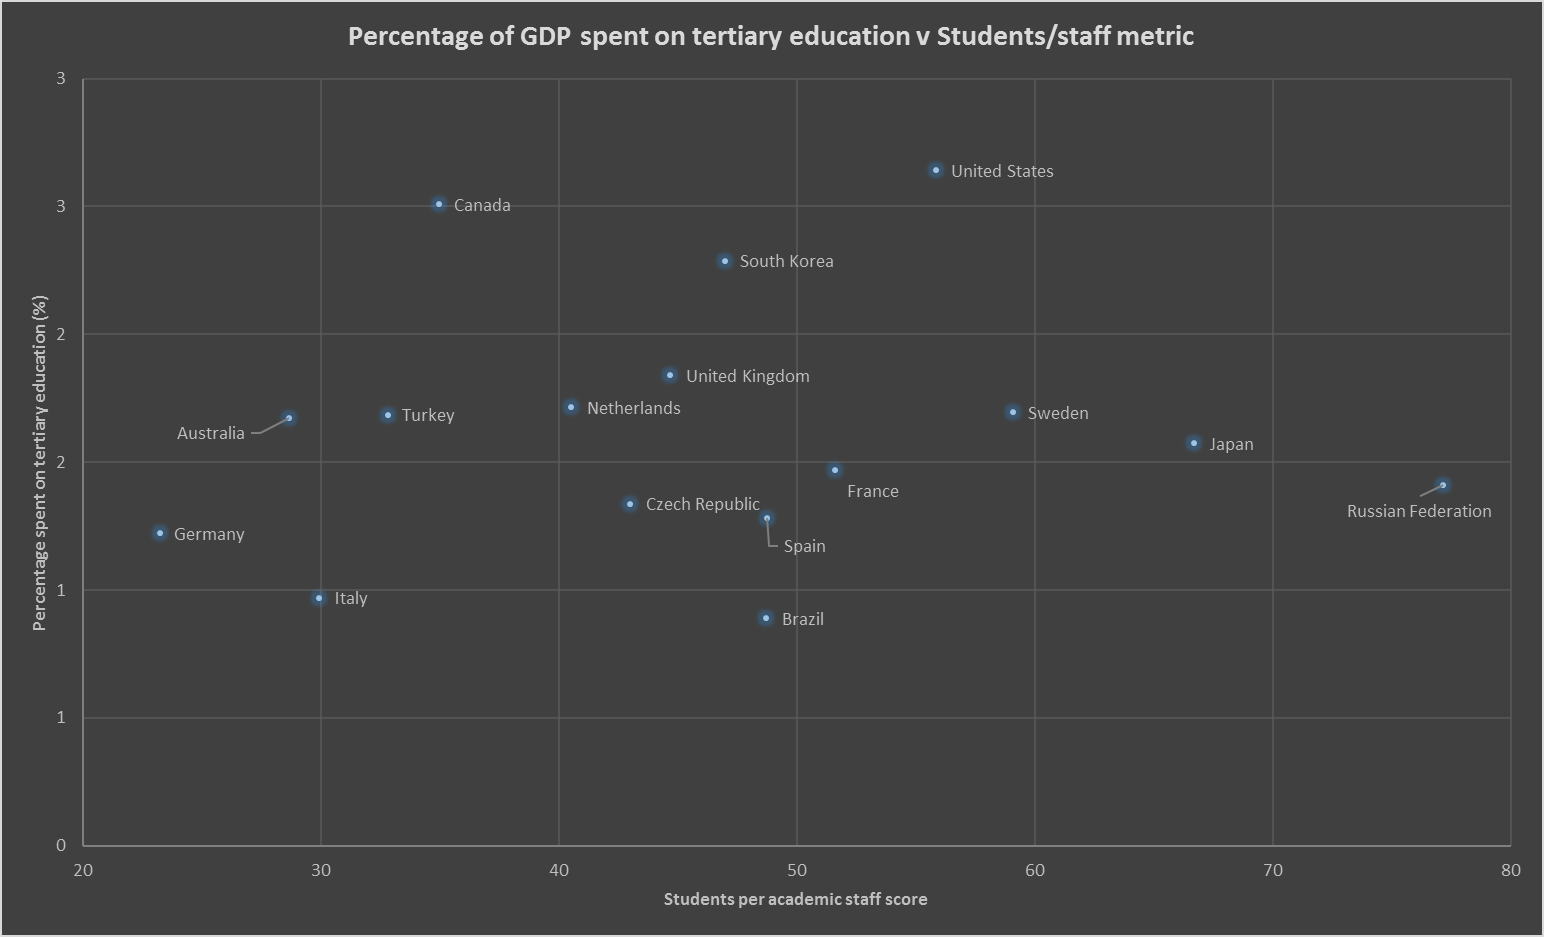 Staff-student ratio scores compared with GDP spending on HE